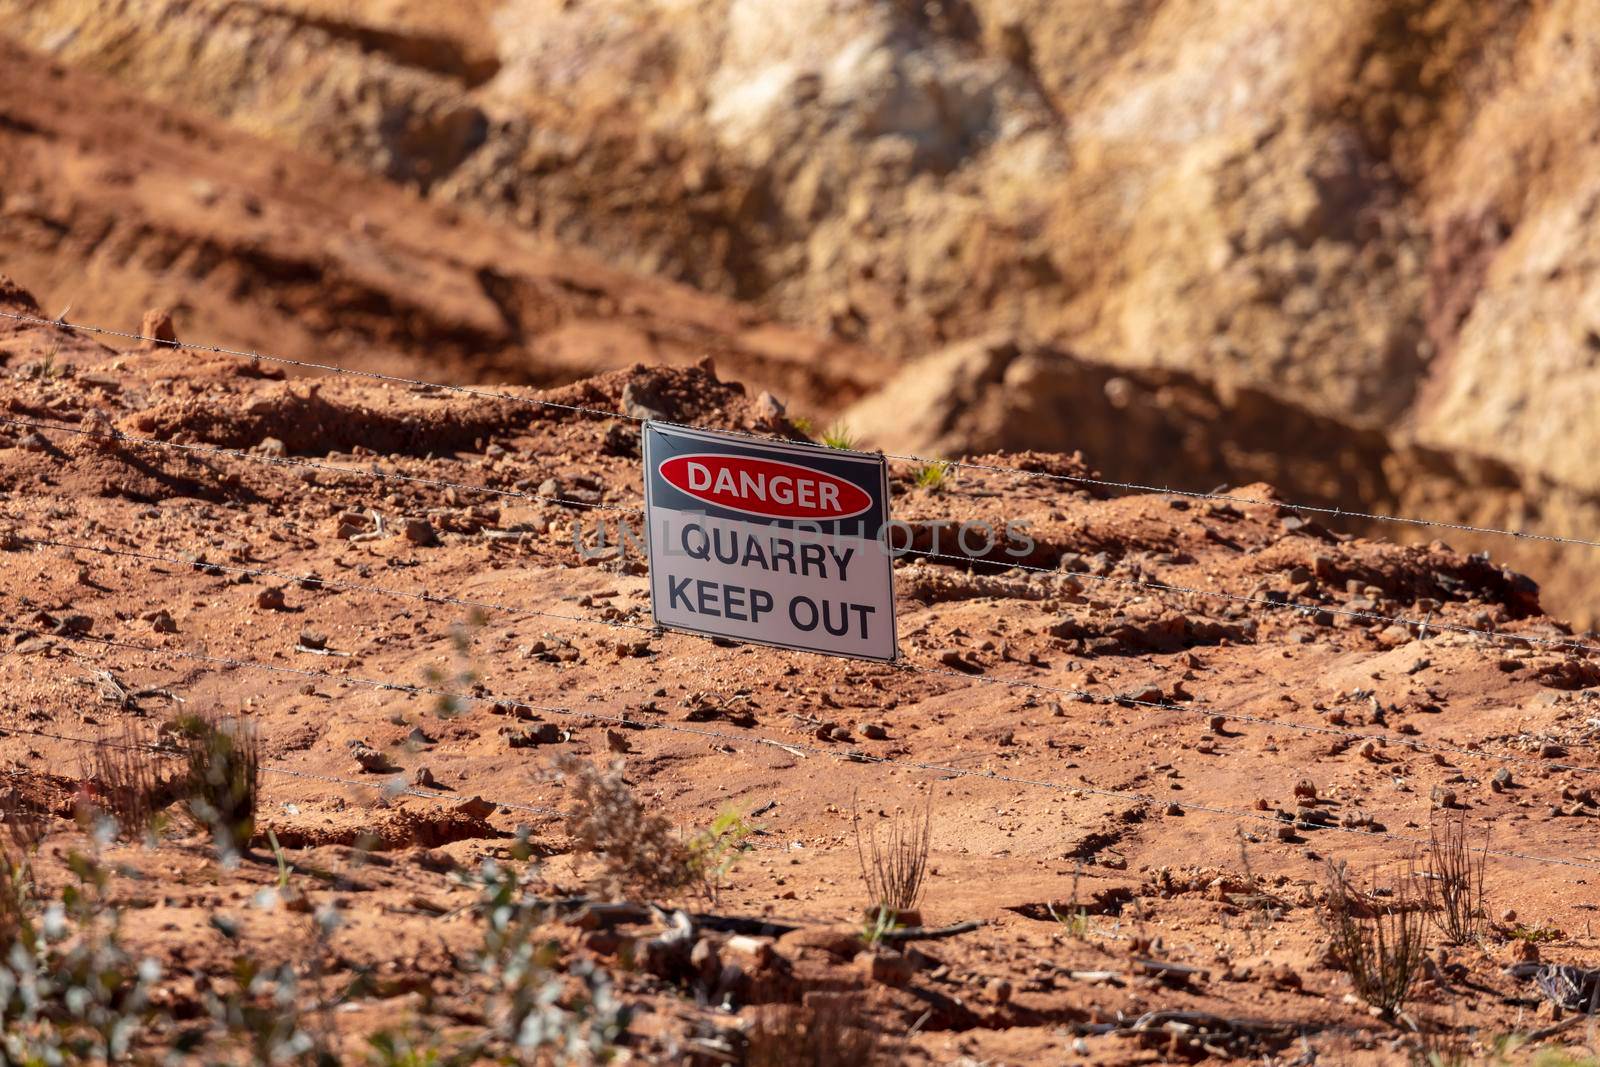 Photograph of a keep out danger sign in a large quarry by WittkePhotos